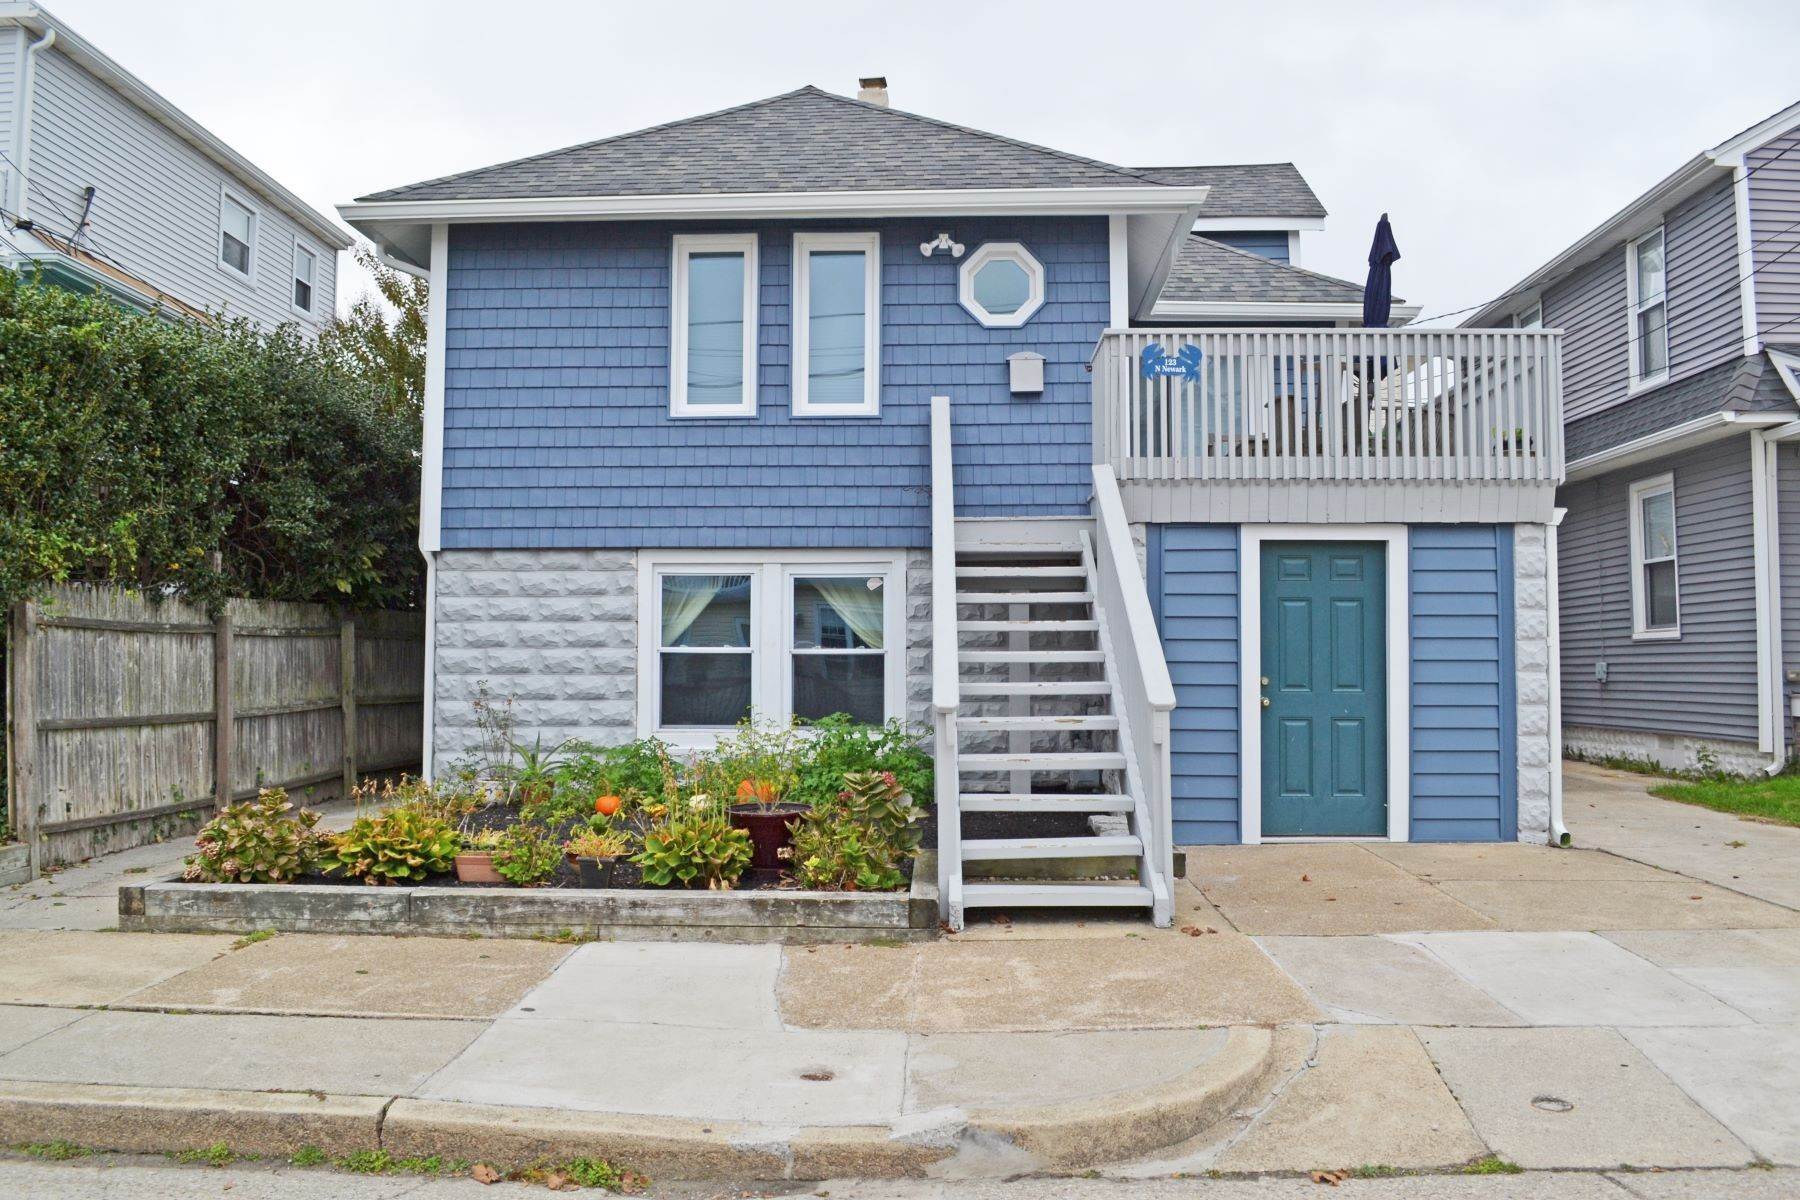 Duplex Homes at 123 N Newark Ave, Upstairs Ventnor, New Jersey 08406 United States